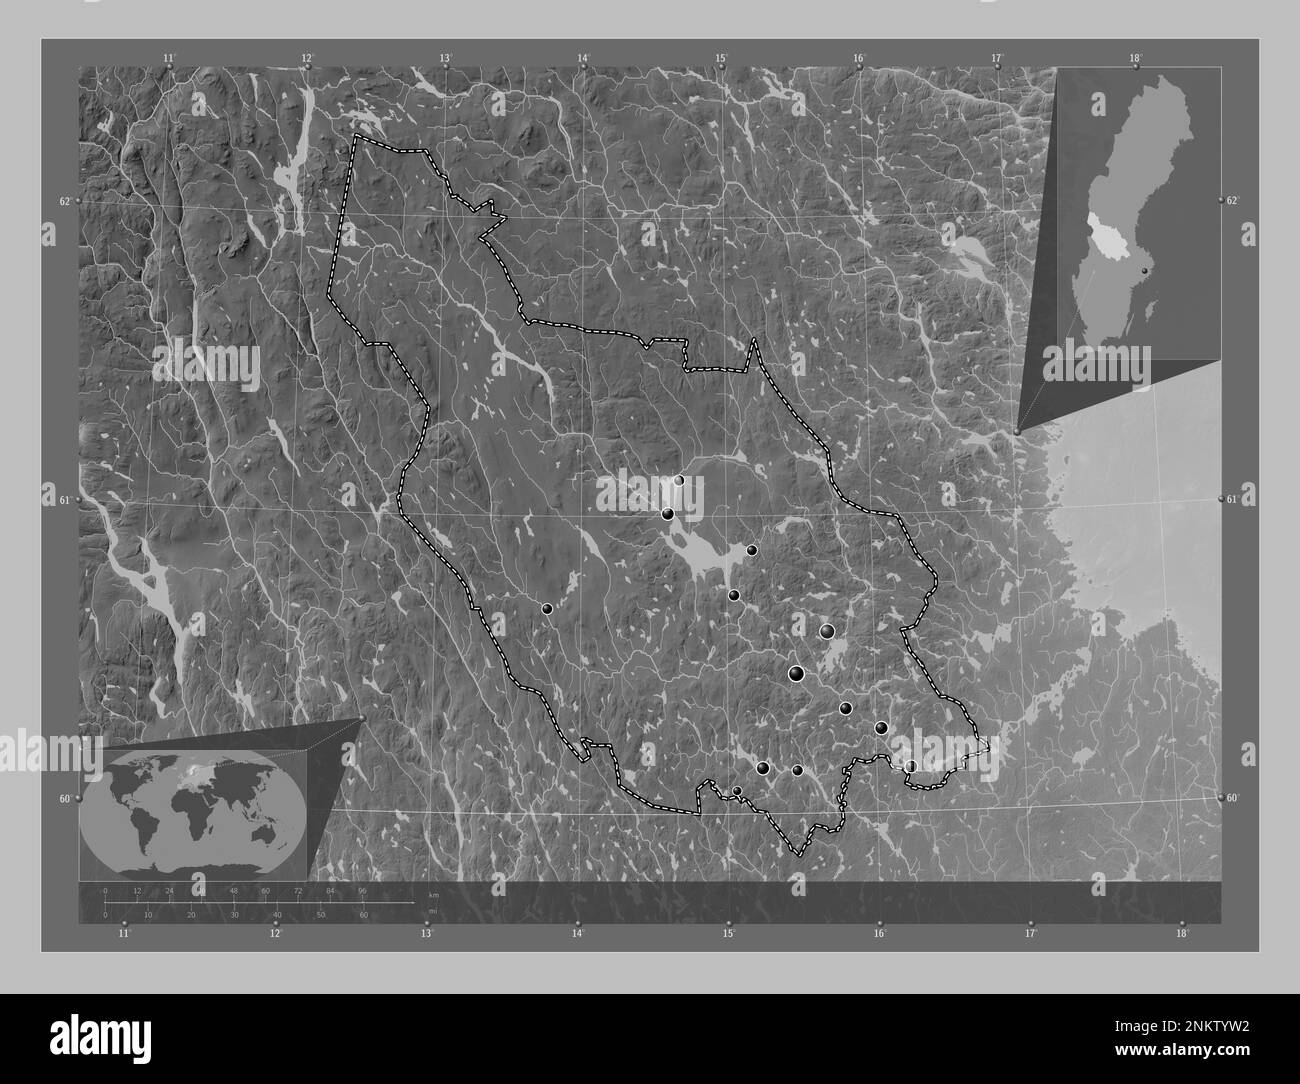 Dalarna, county of Sweden. Grayscale elevation map with lakes and rivers. Locations of major cities of the region. Corner auxiliary location maps Stock Photo